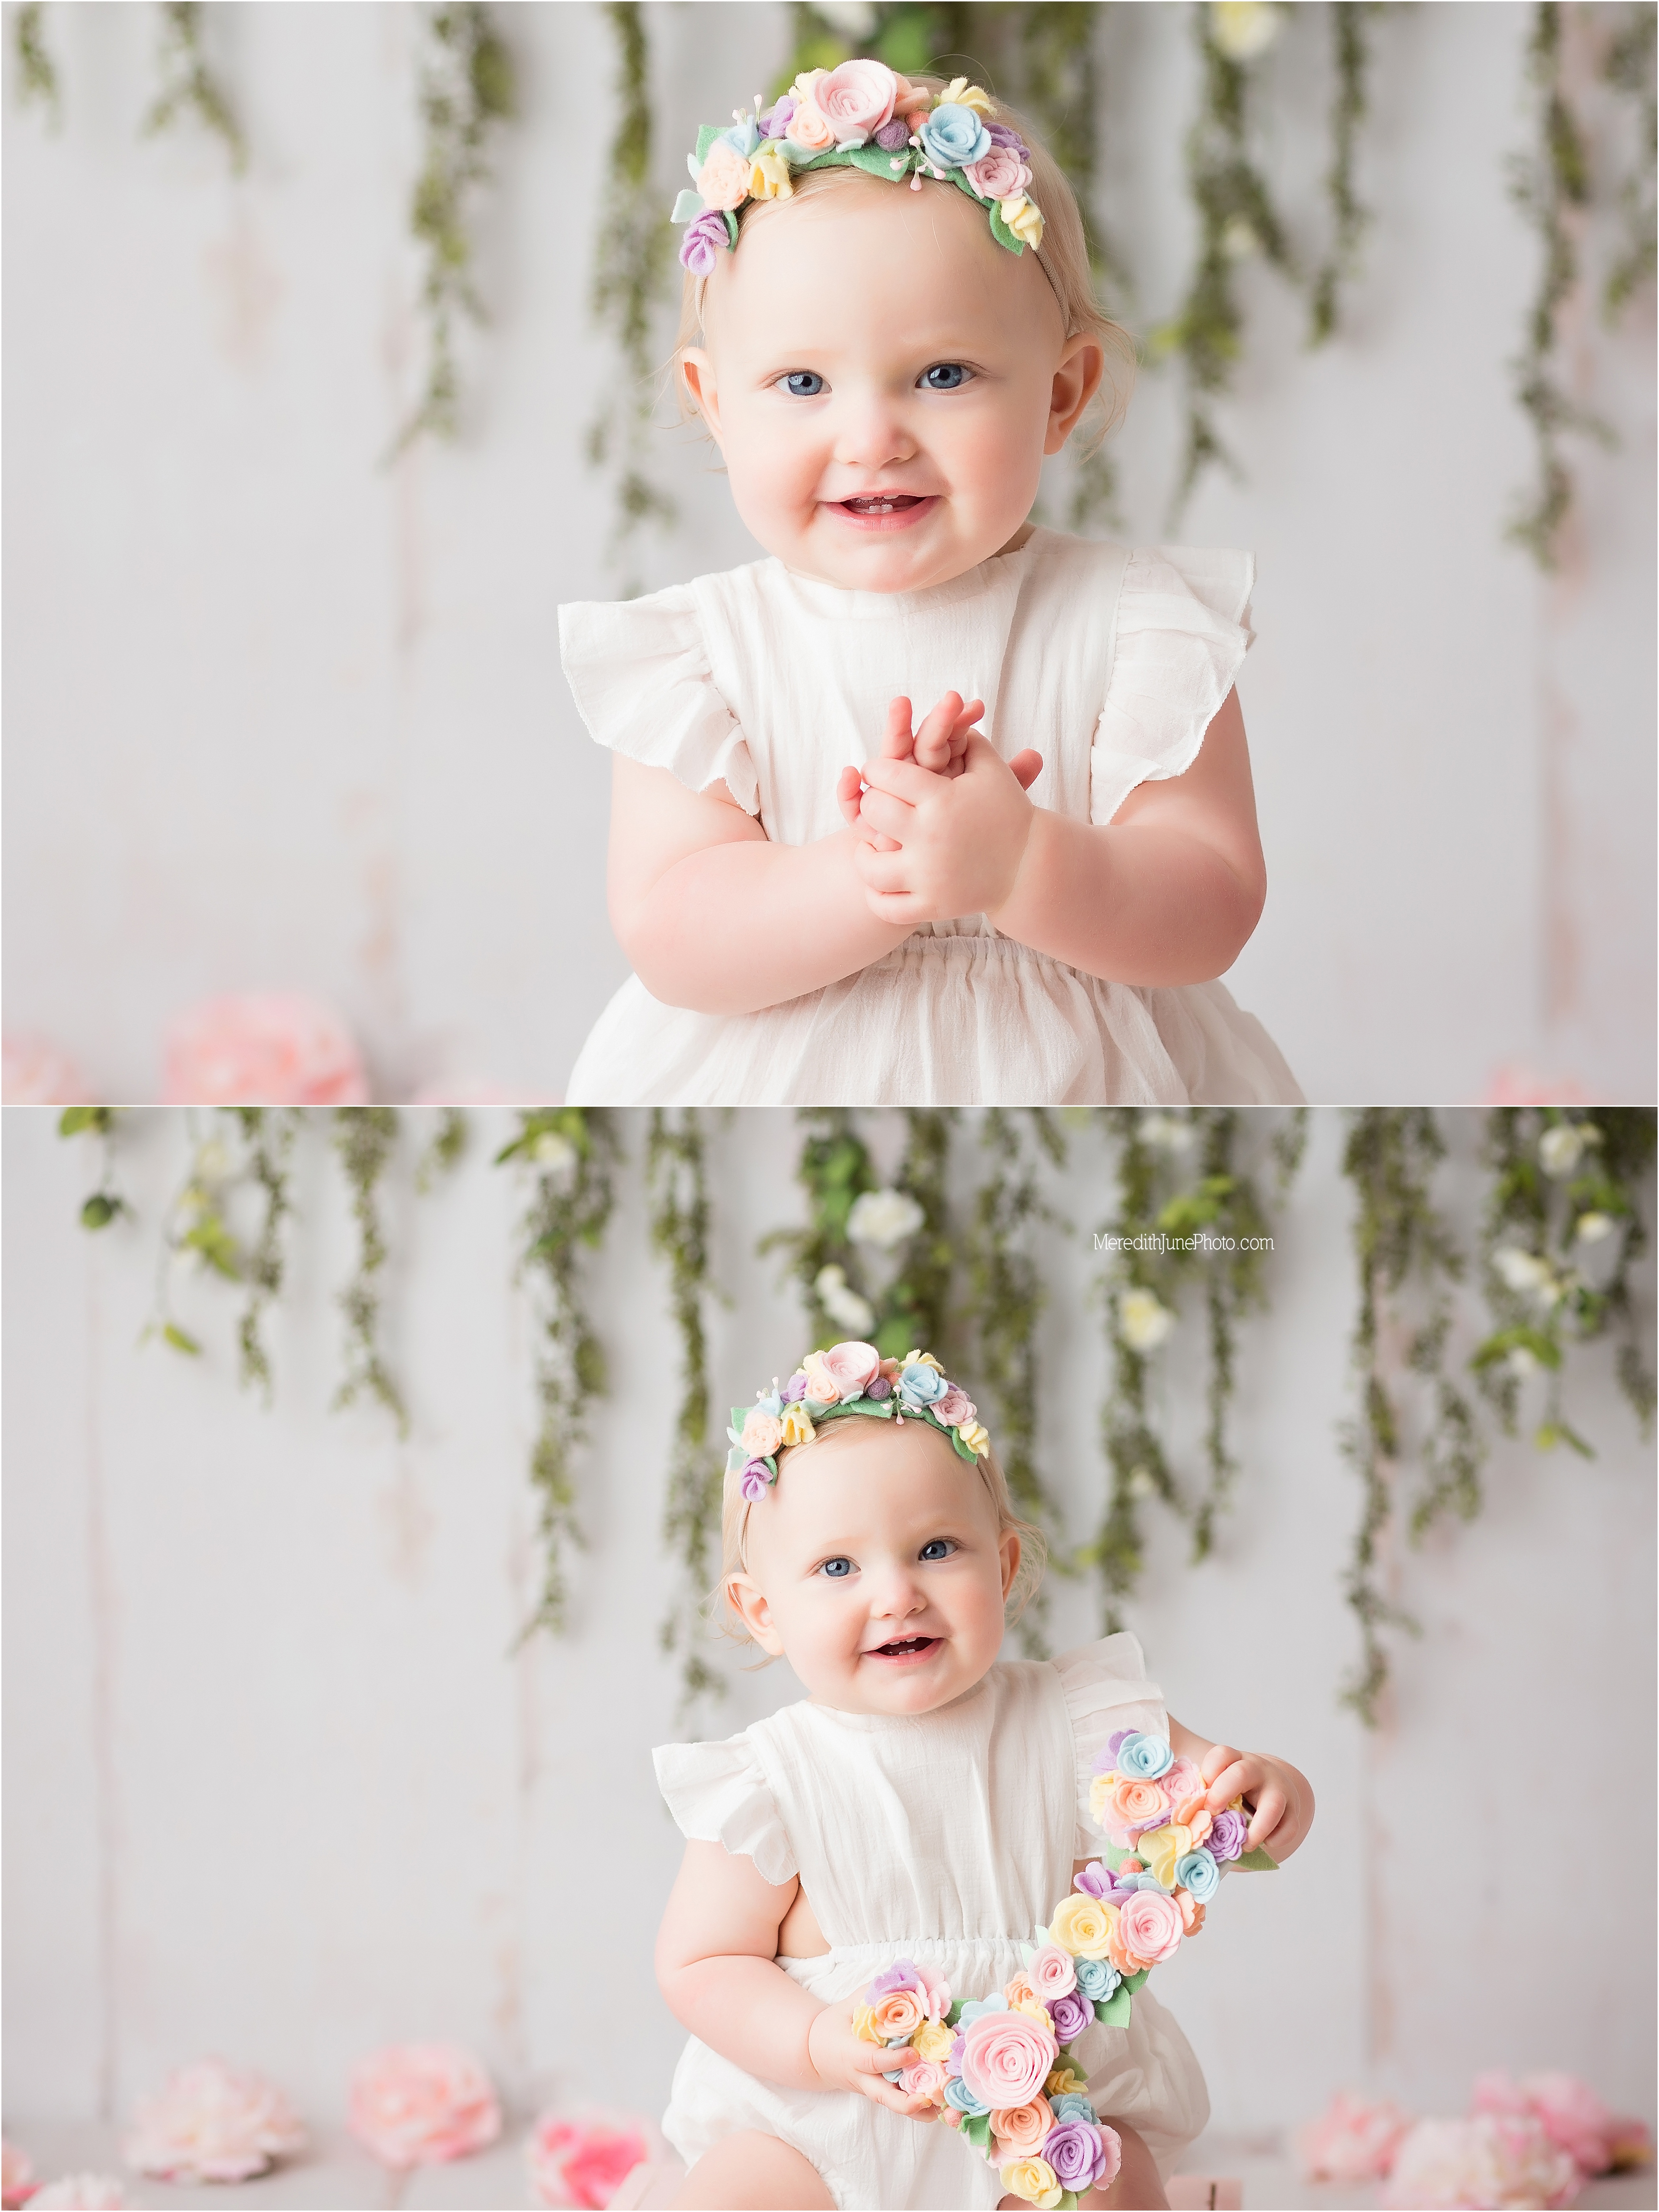 Murphy Jane's first cake smash session at Meredith June Photography